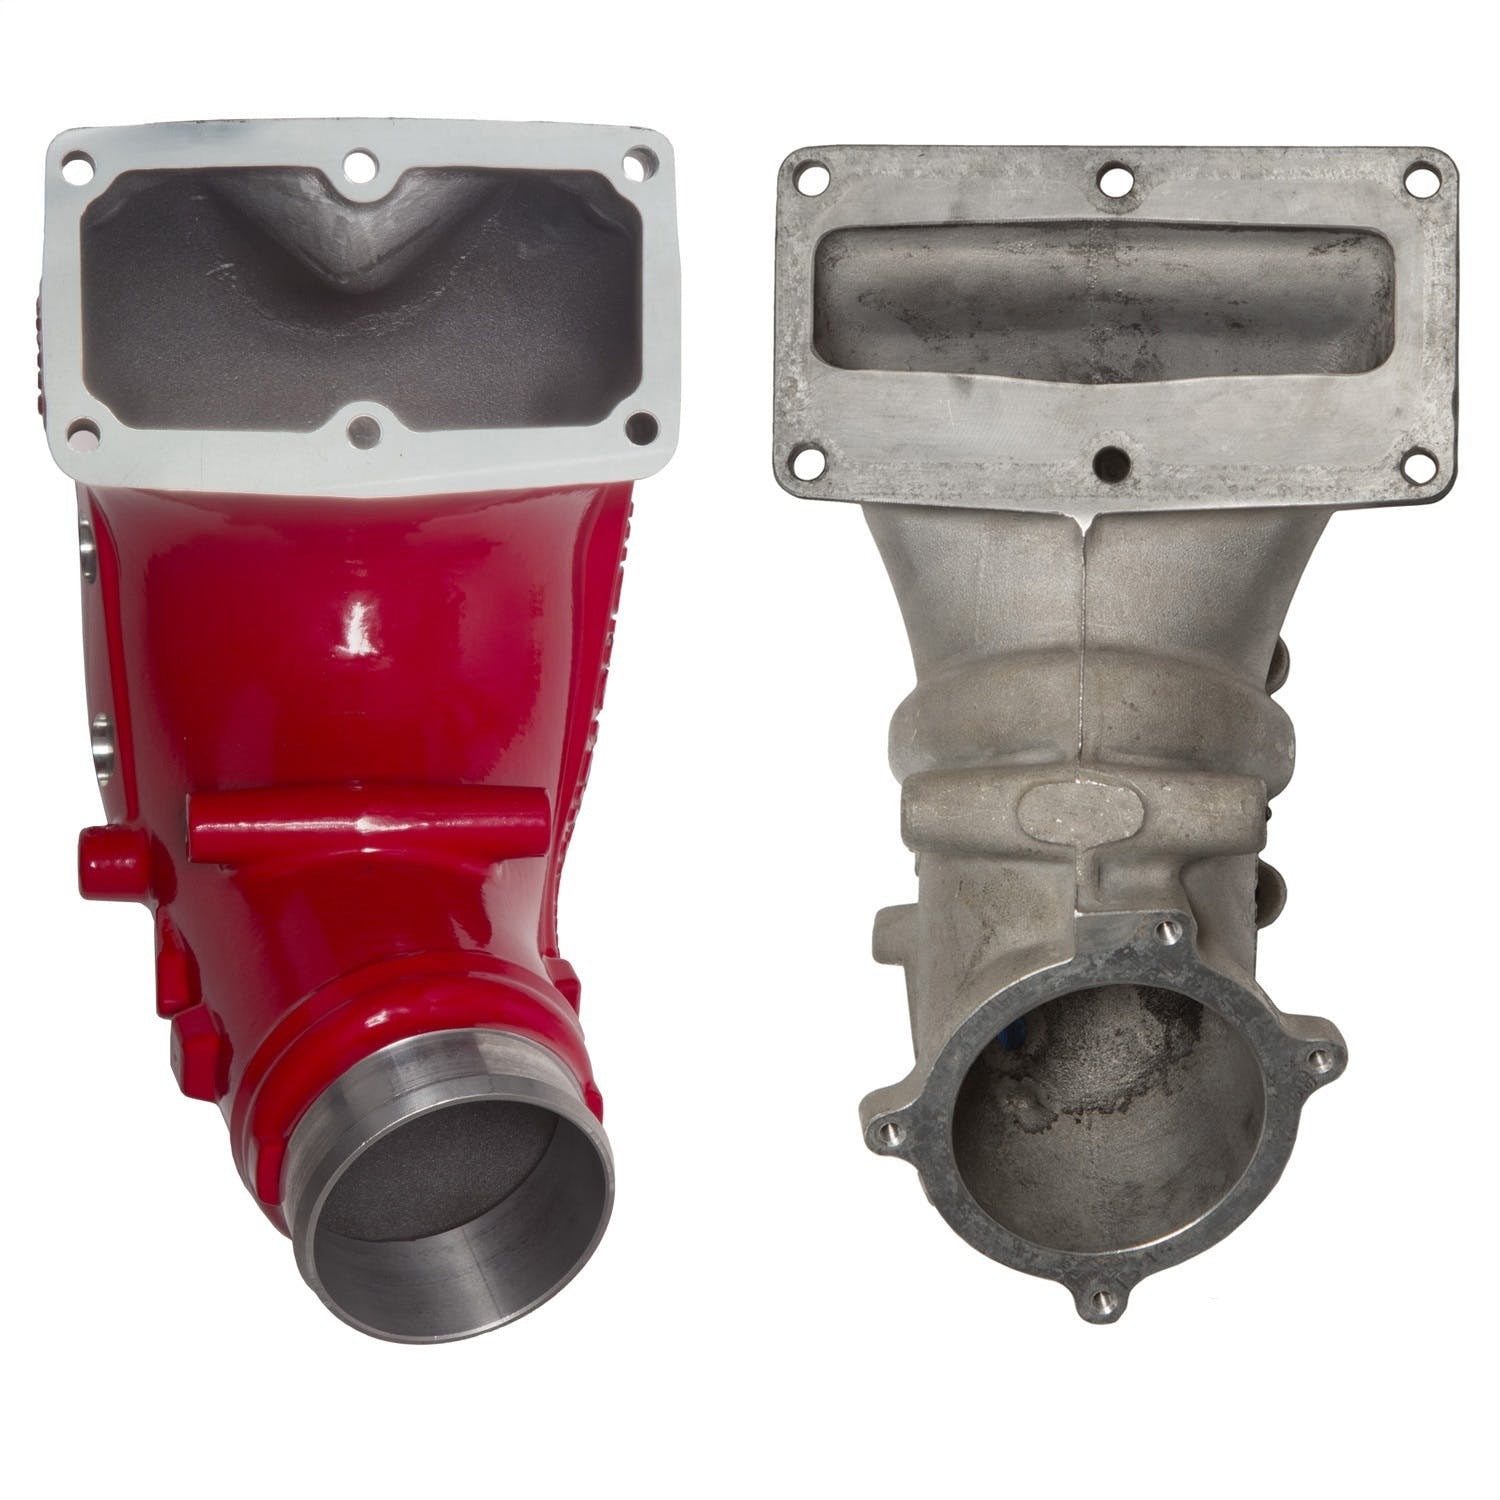 Banks Power 42788-PC Monster-Ram Intake Elbow Kit with Fuel Line, 3.5 inch Red Powder Coated